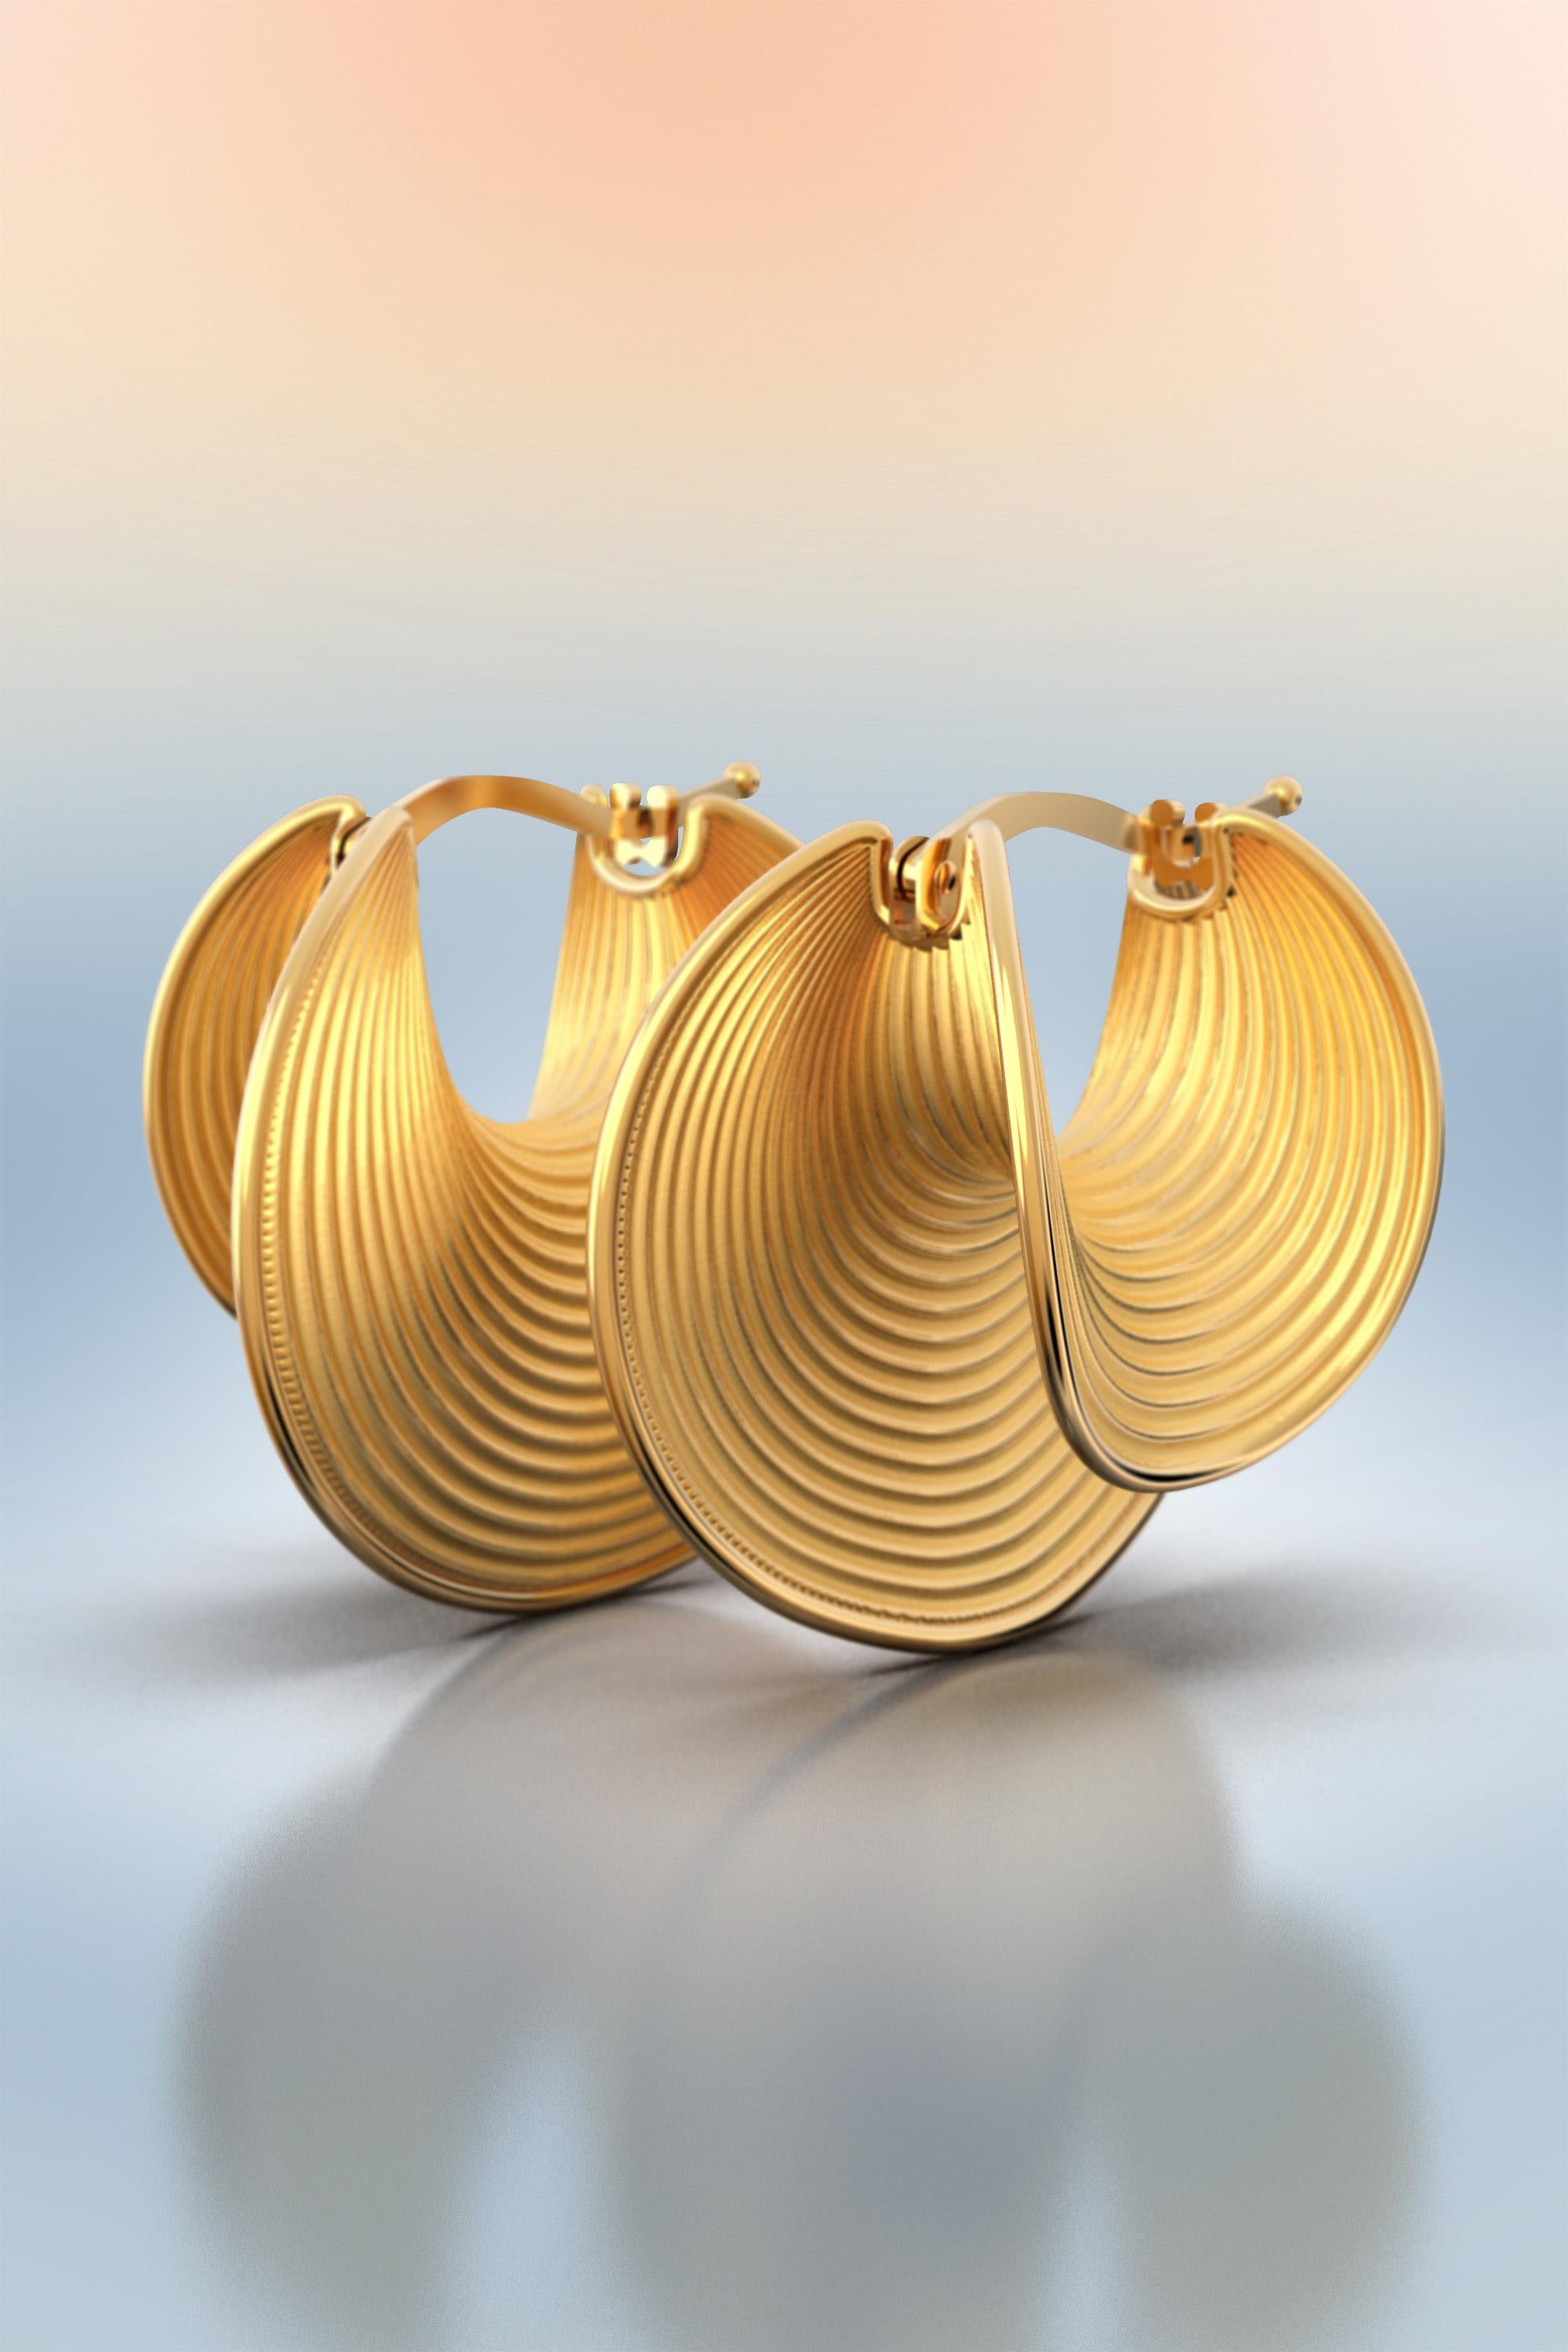 27 mm diameter beautiful hoop earrings crafted in polished and raw solid gold 18k 
Available in yellow gold, rose gold and white gold, 18k or 14k on request.
The earrings are secured by a trusty snap closure.
The approximate total weight is 10 grams